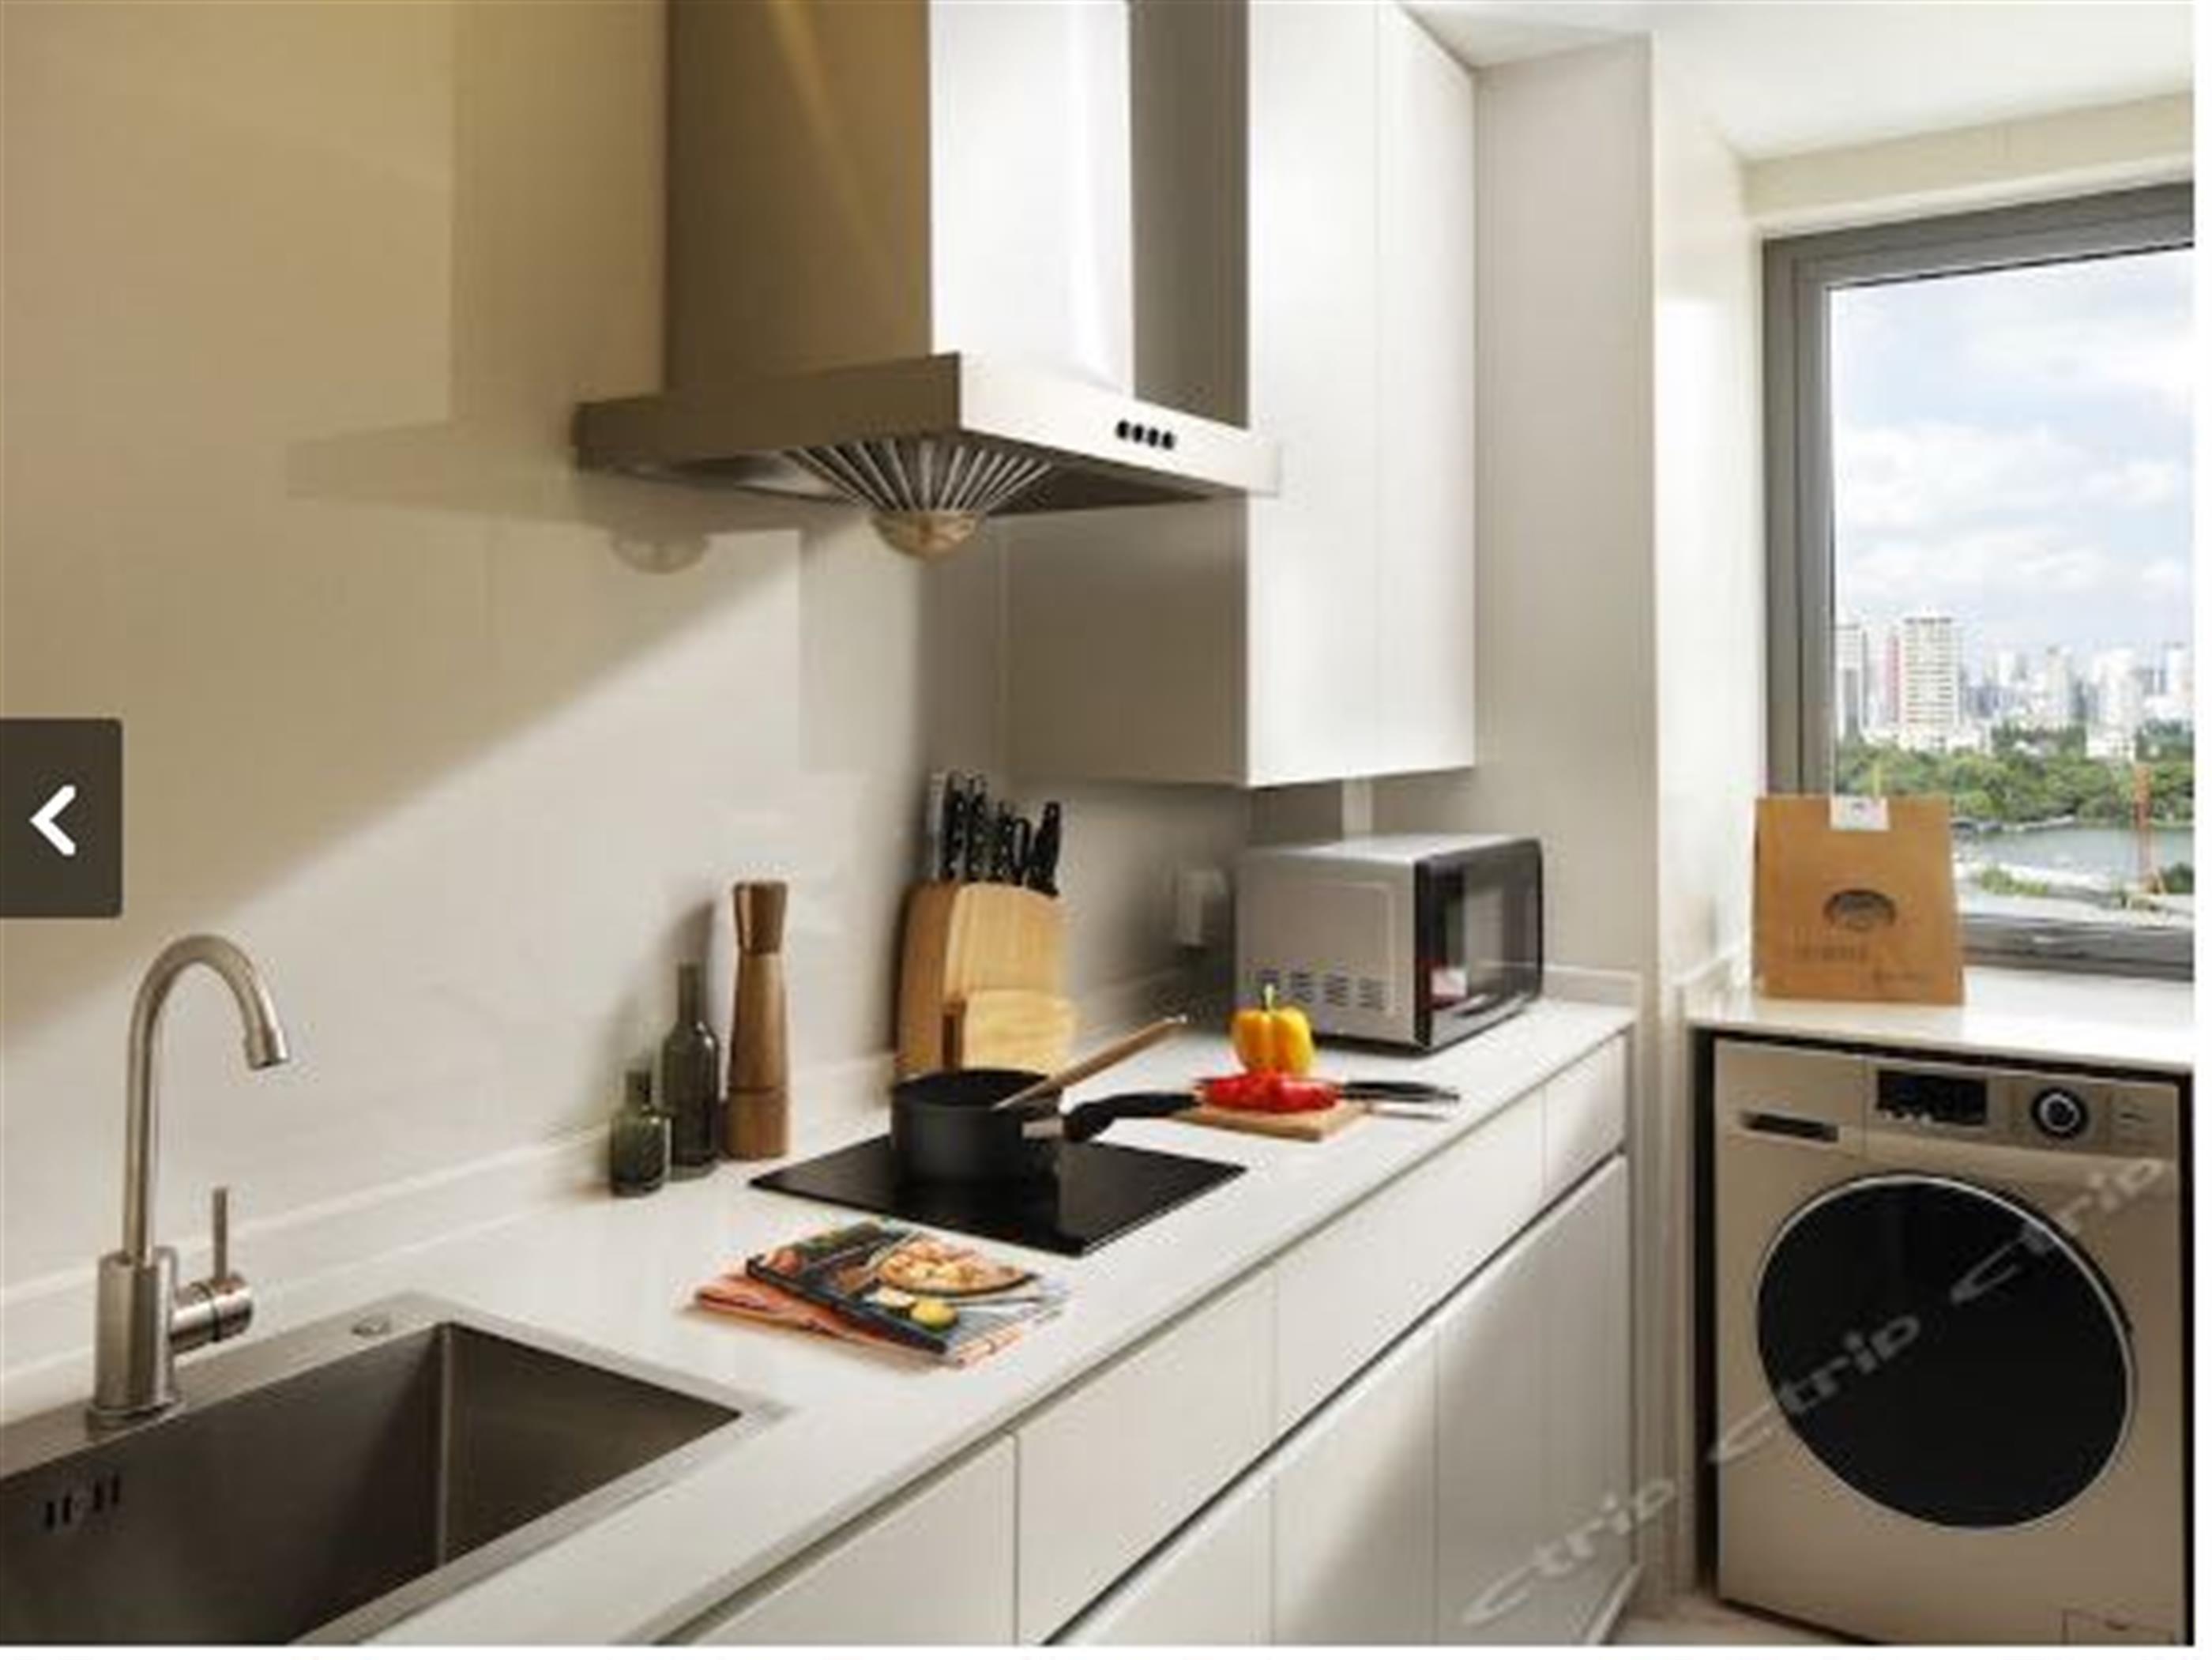 laundry area New Bright Convenient 2BR Putuo Service Apartments nr LN 13/15 for Rent in Shanghai